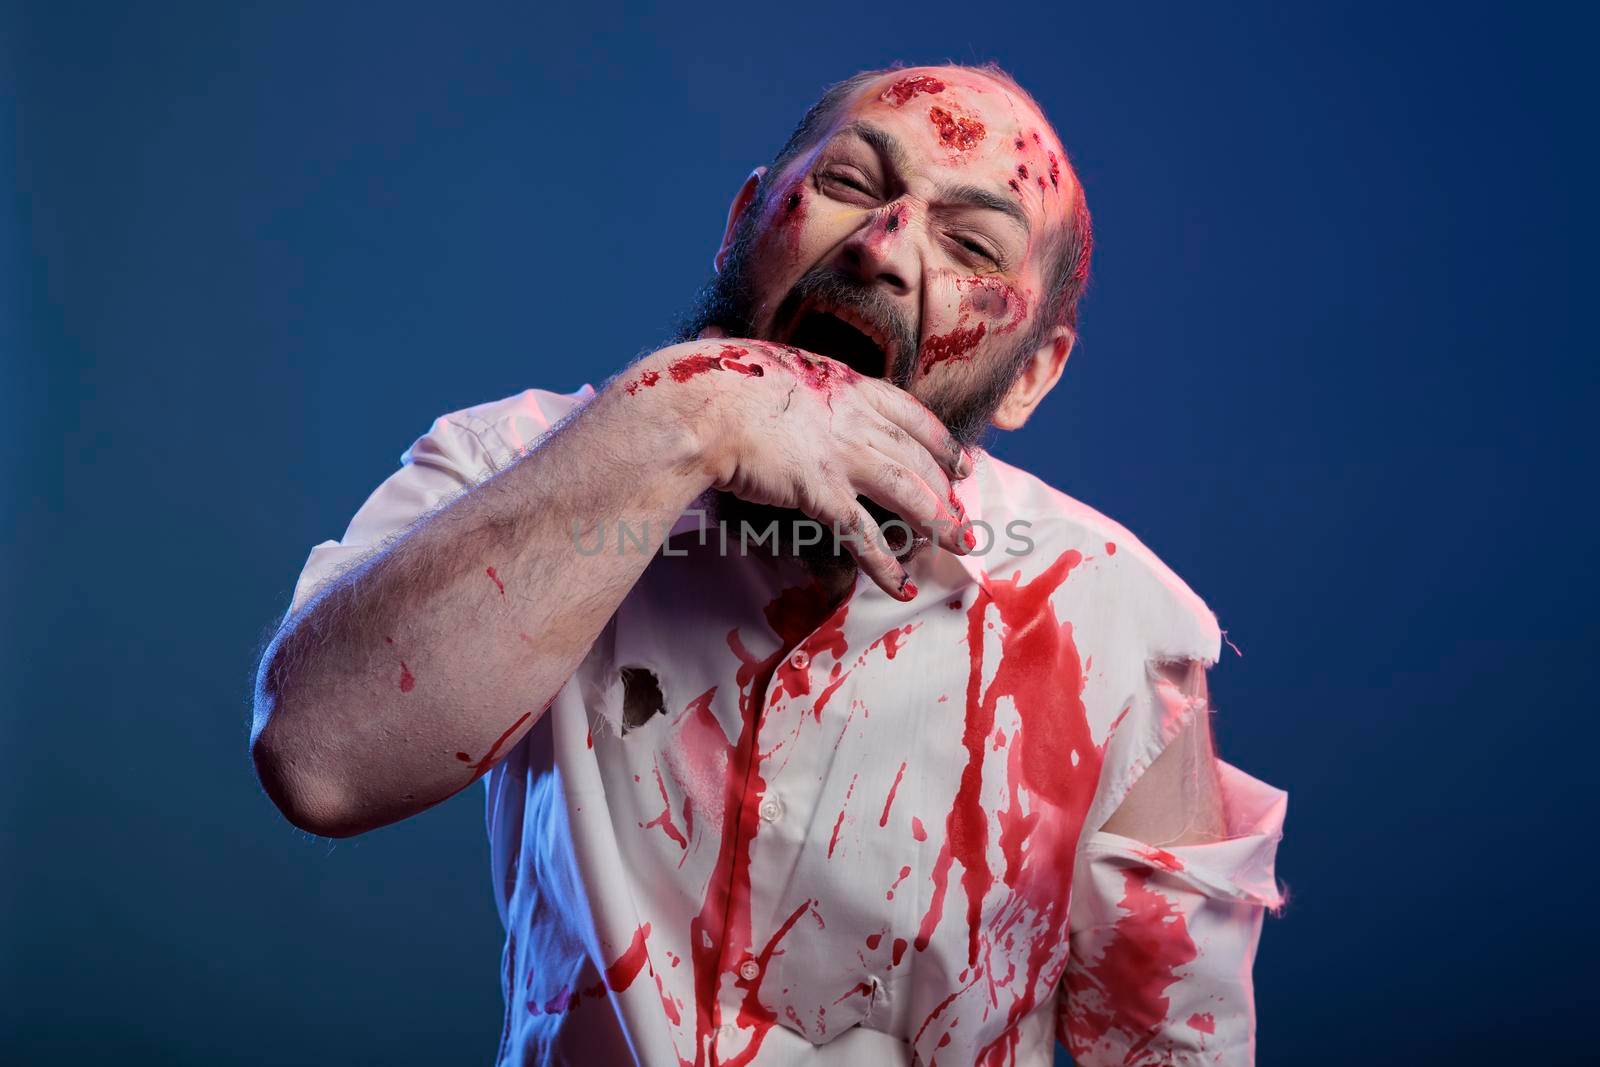 Halloween cruel zombie biting hand with scars and bloody wounds, standing in studio. Apocalyptic frightening corpse and brain eating villain with deadly horror face and aggressive sinister eyes.